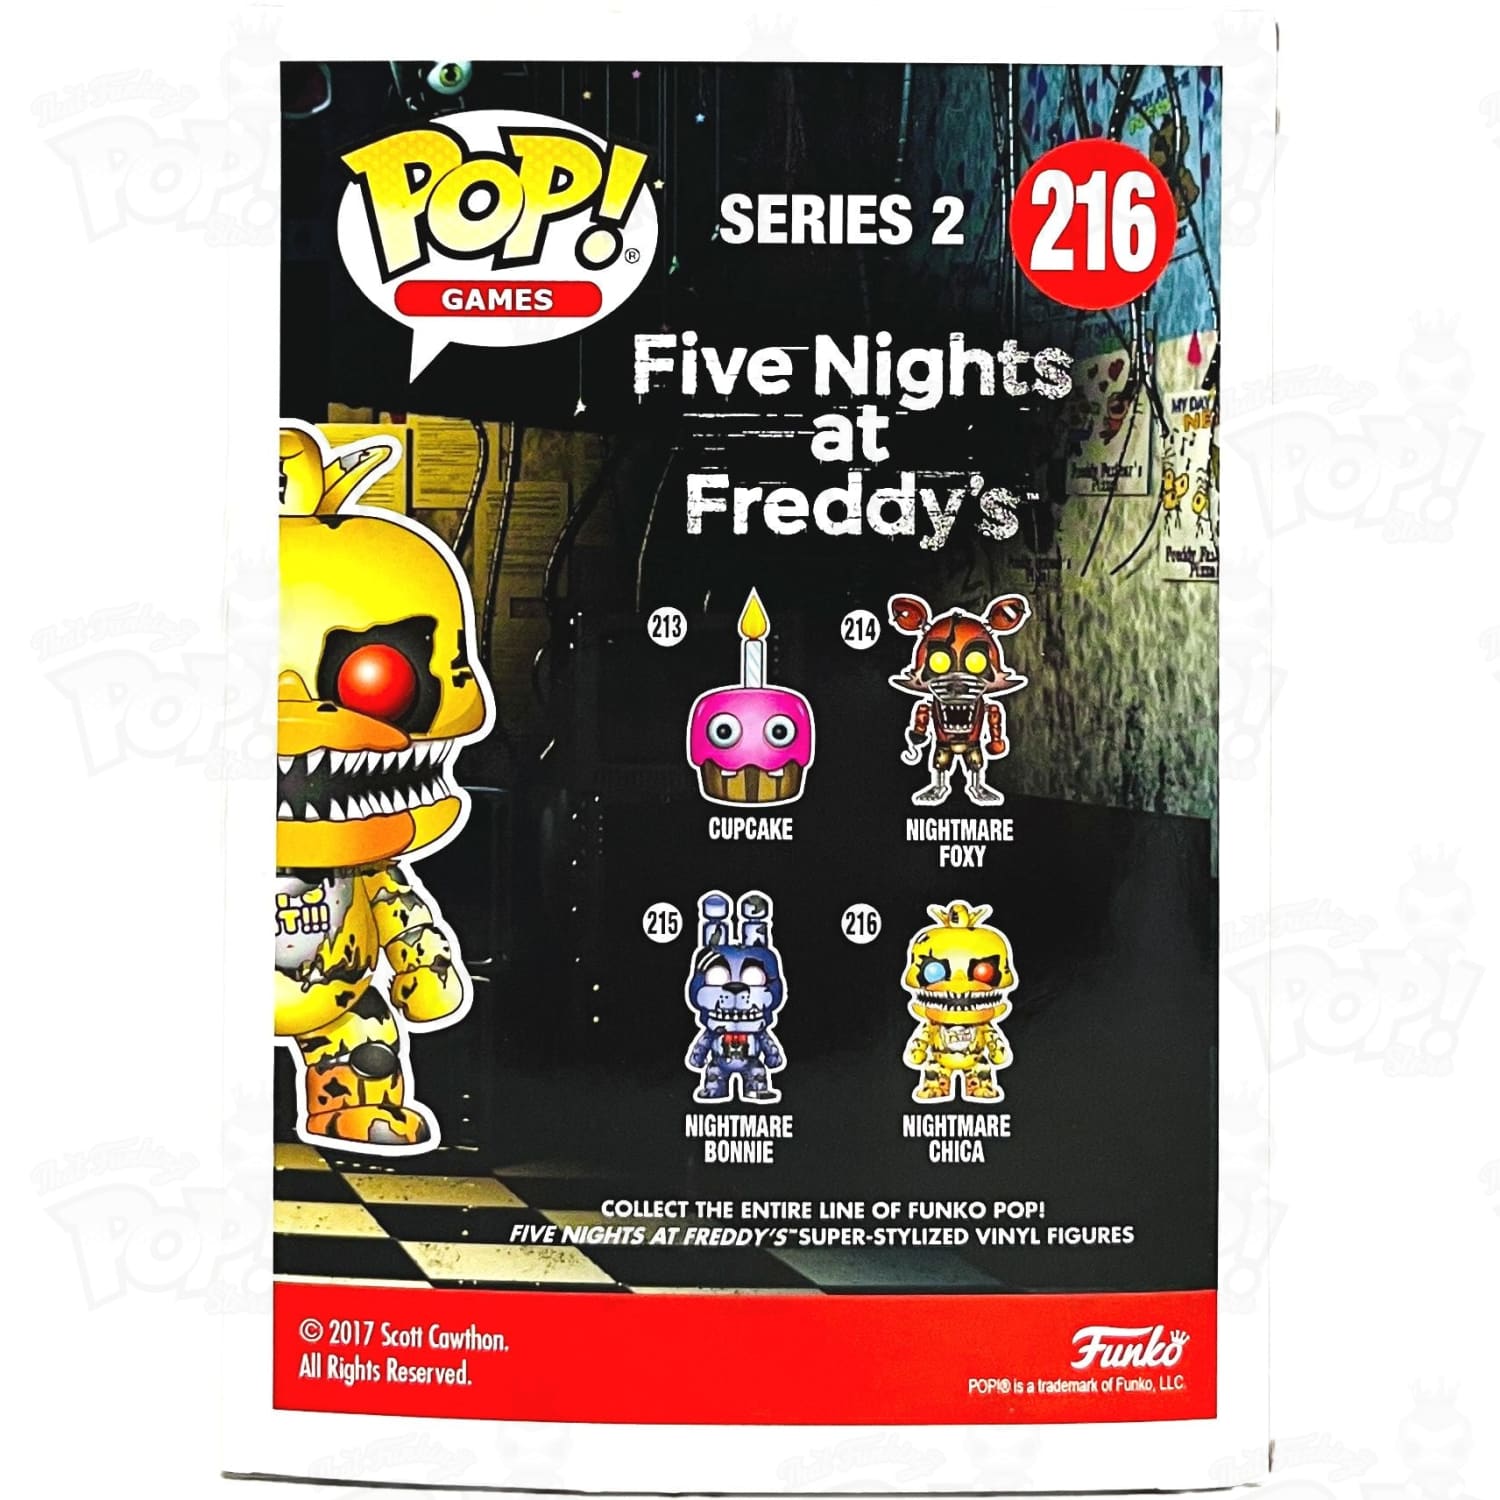 Funko POP Five Nights at Freddy's Nightmare Chica Figure Buy at